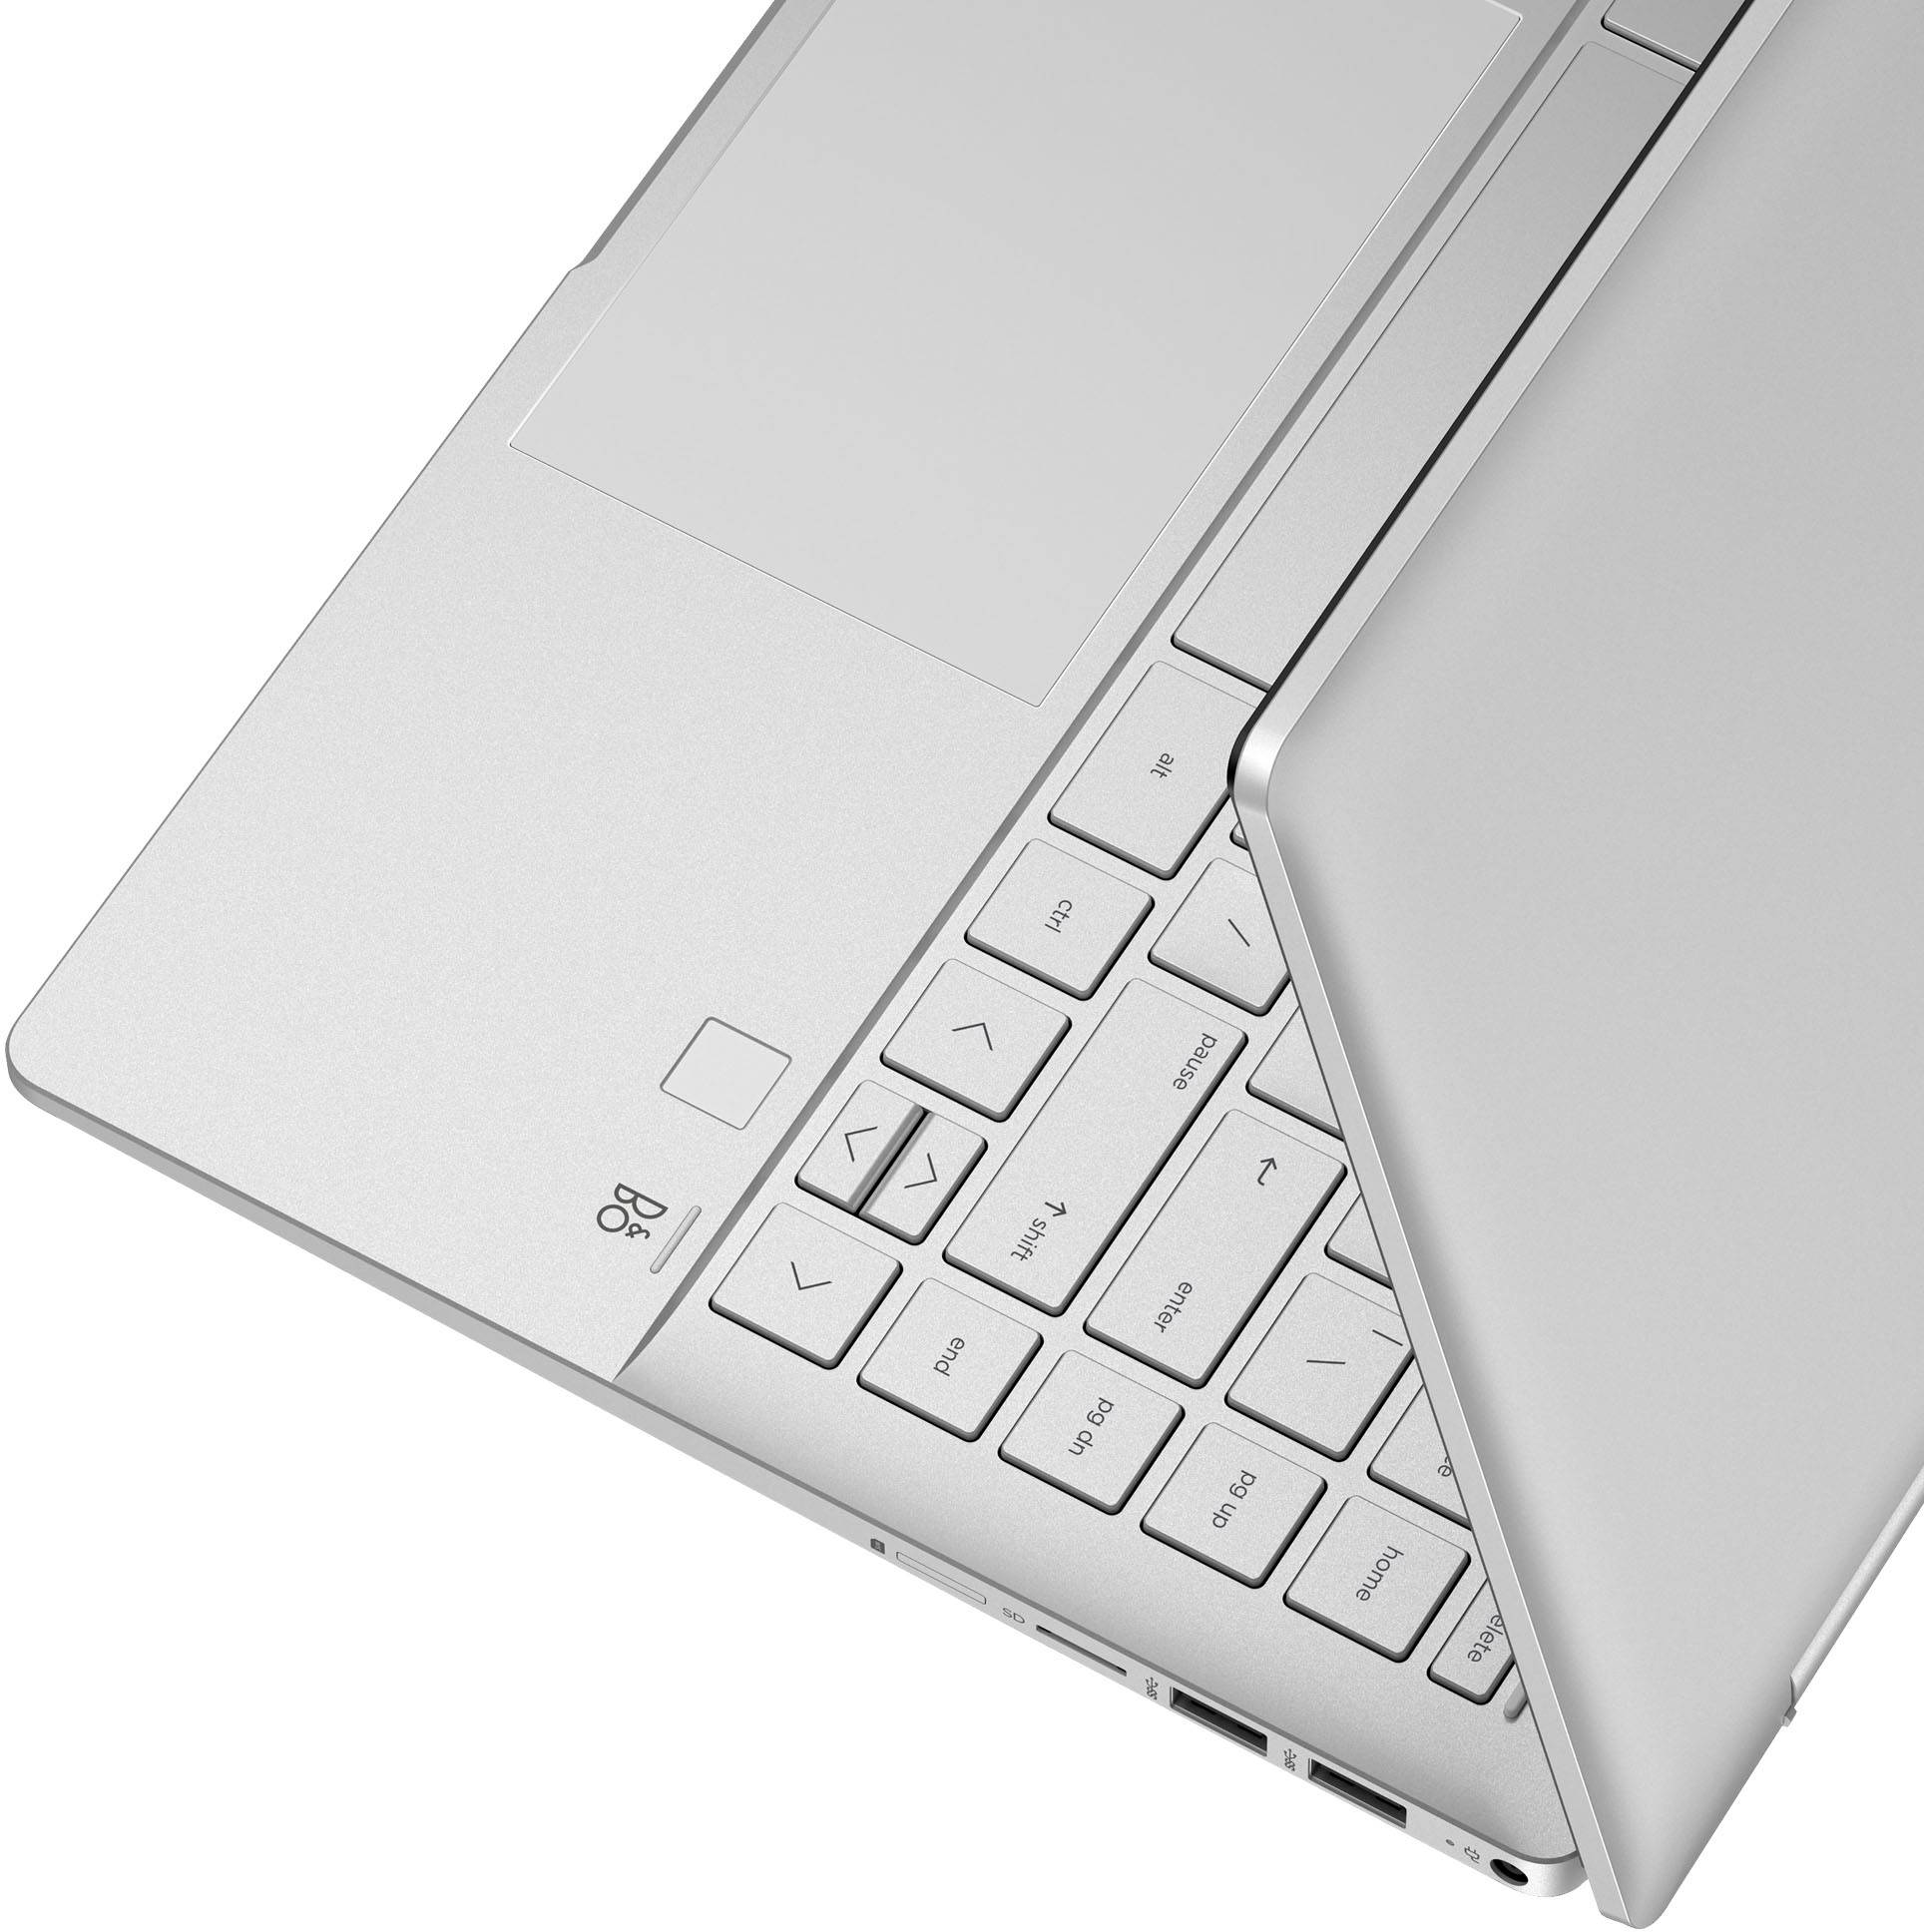 HP - Pavilion x360 2-in-1 14 Touch-Screen Laptop - Intel Core i5-8GB  Memory - 512GB SSD - Natural Silver - Mode 14-ek0033dx